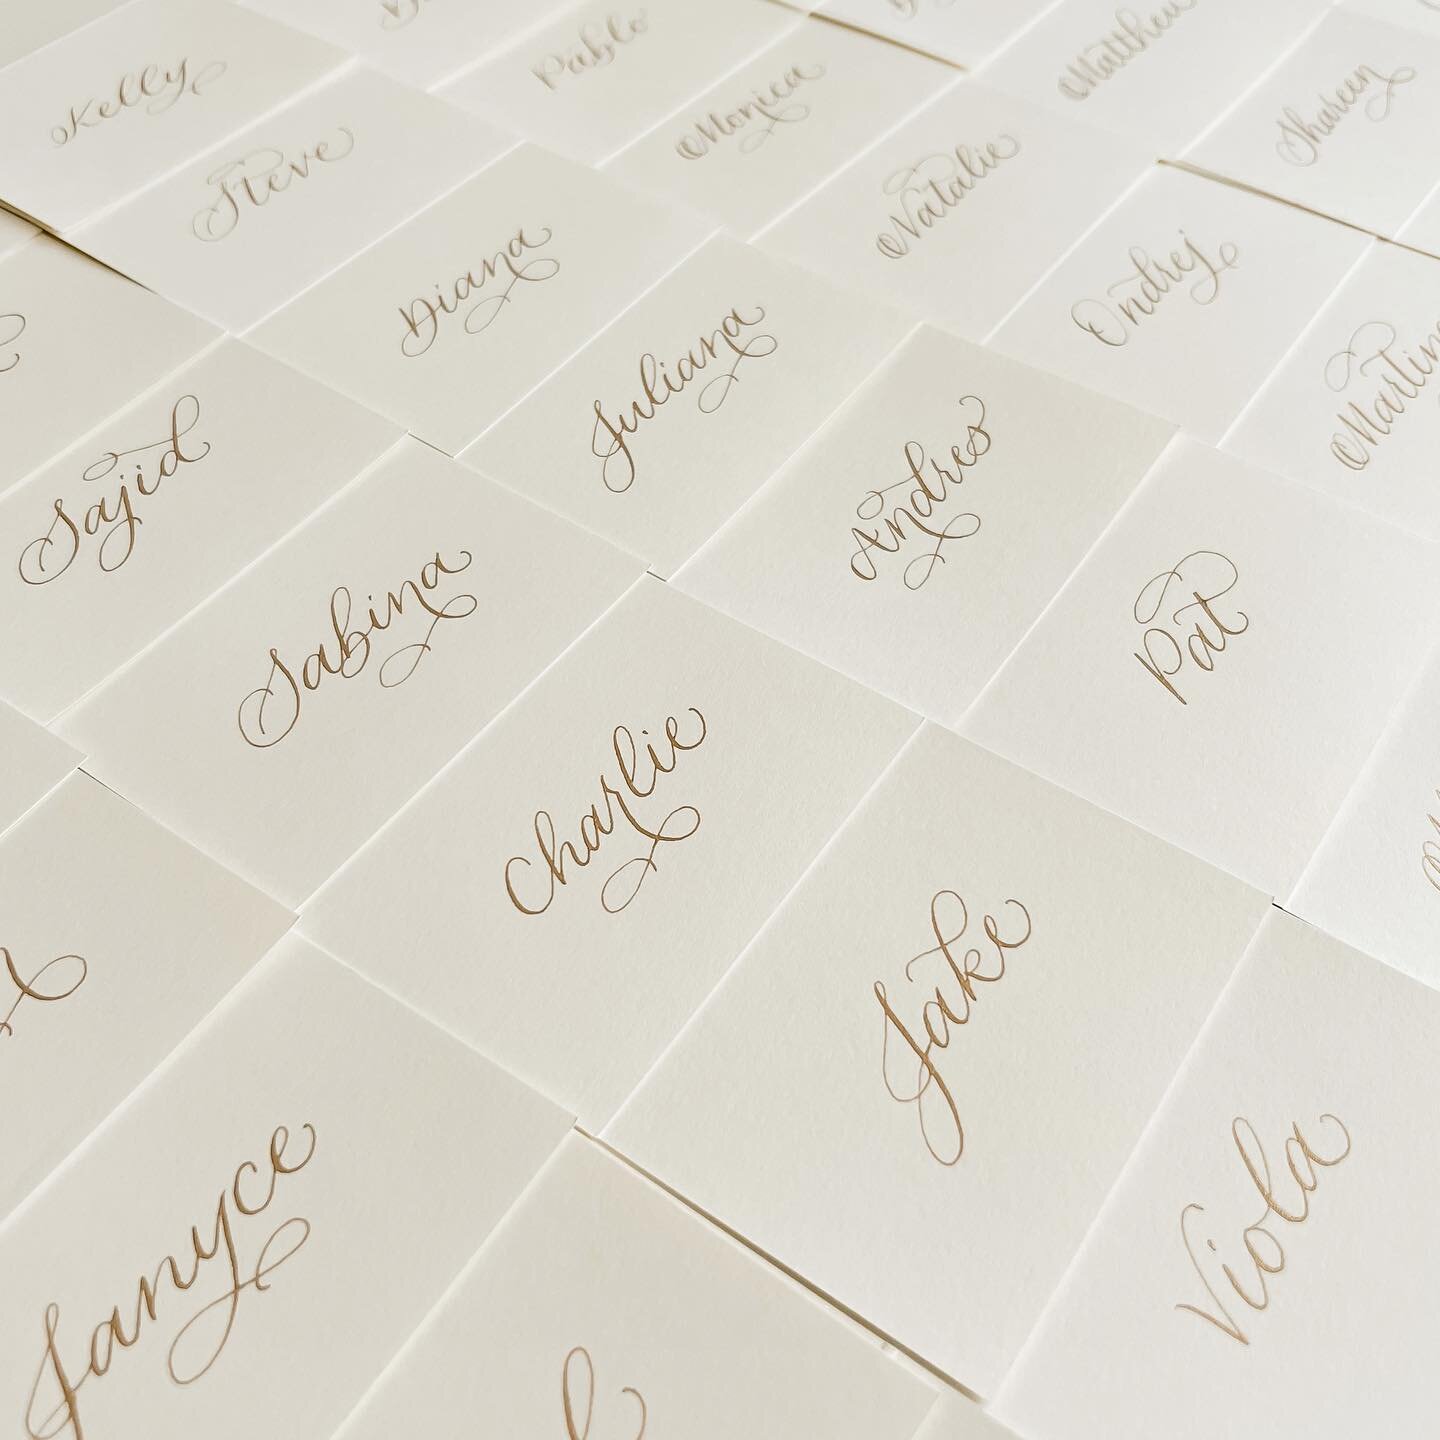 These ivory and gold place cards are on their way to Prague!

I forgot to take a video, but hey, at least I remembered to take a quick picture of them. Anyone else miss the simplicity of just posting photos on here? I&rsquo;ve only made 4 reels and I